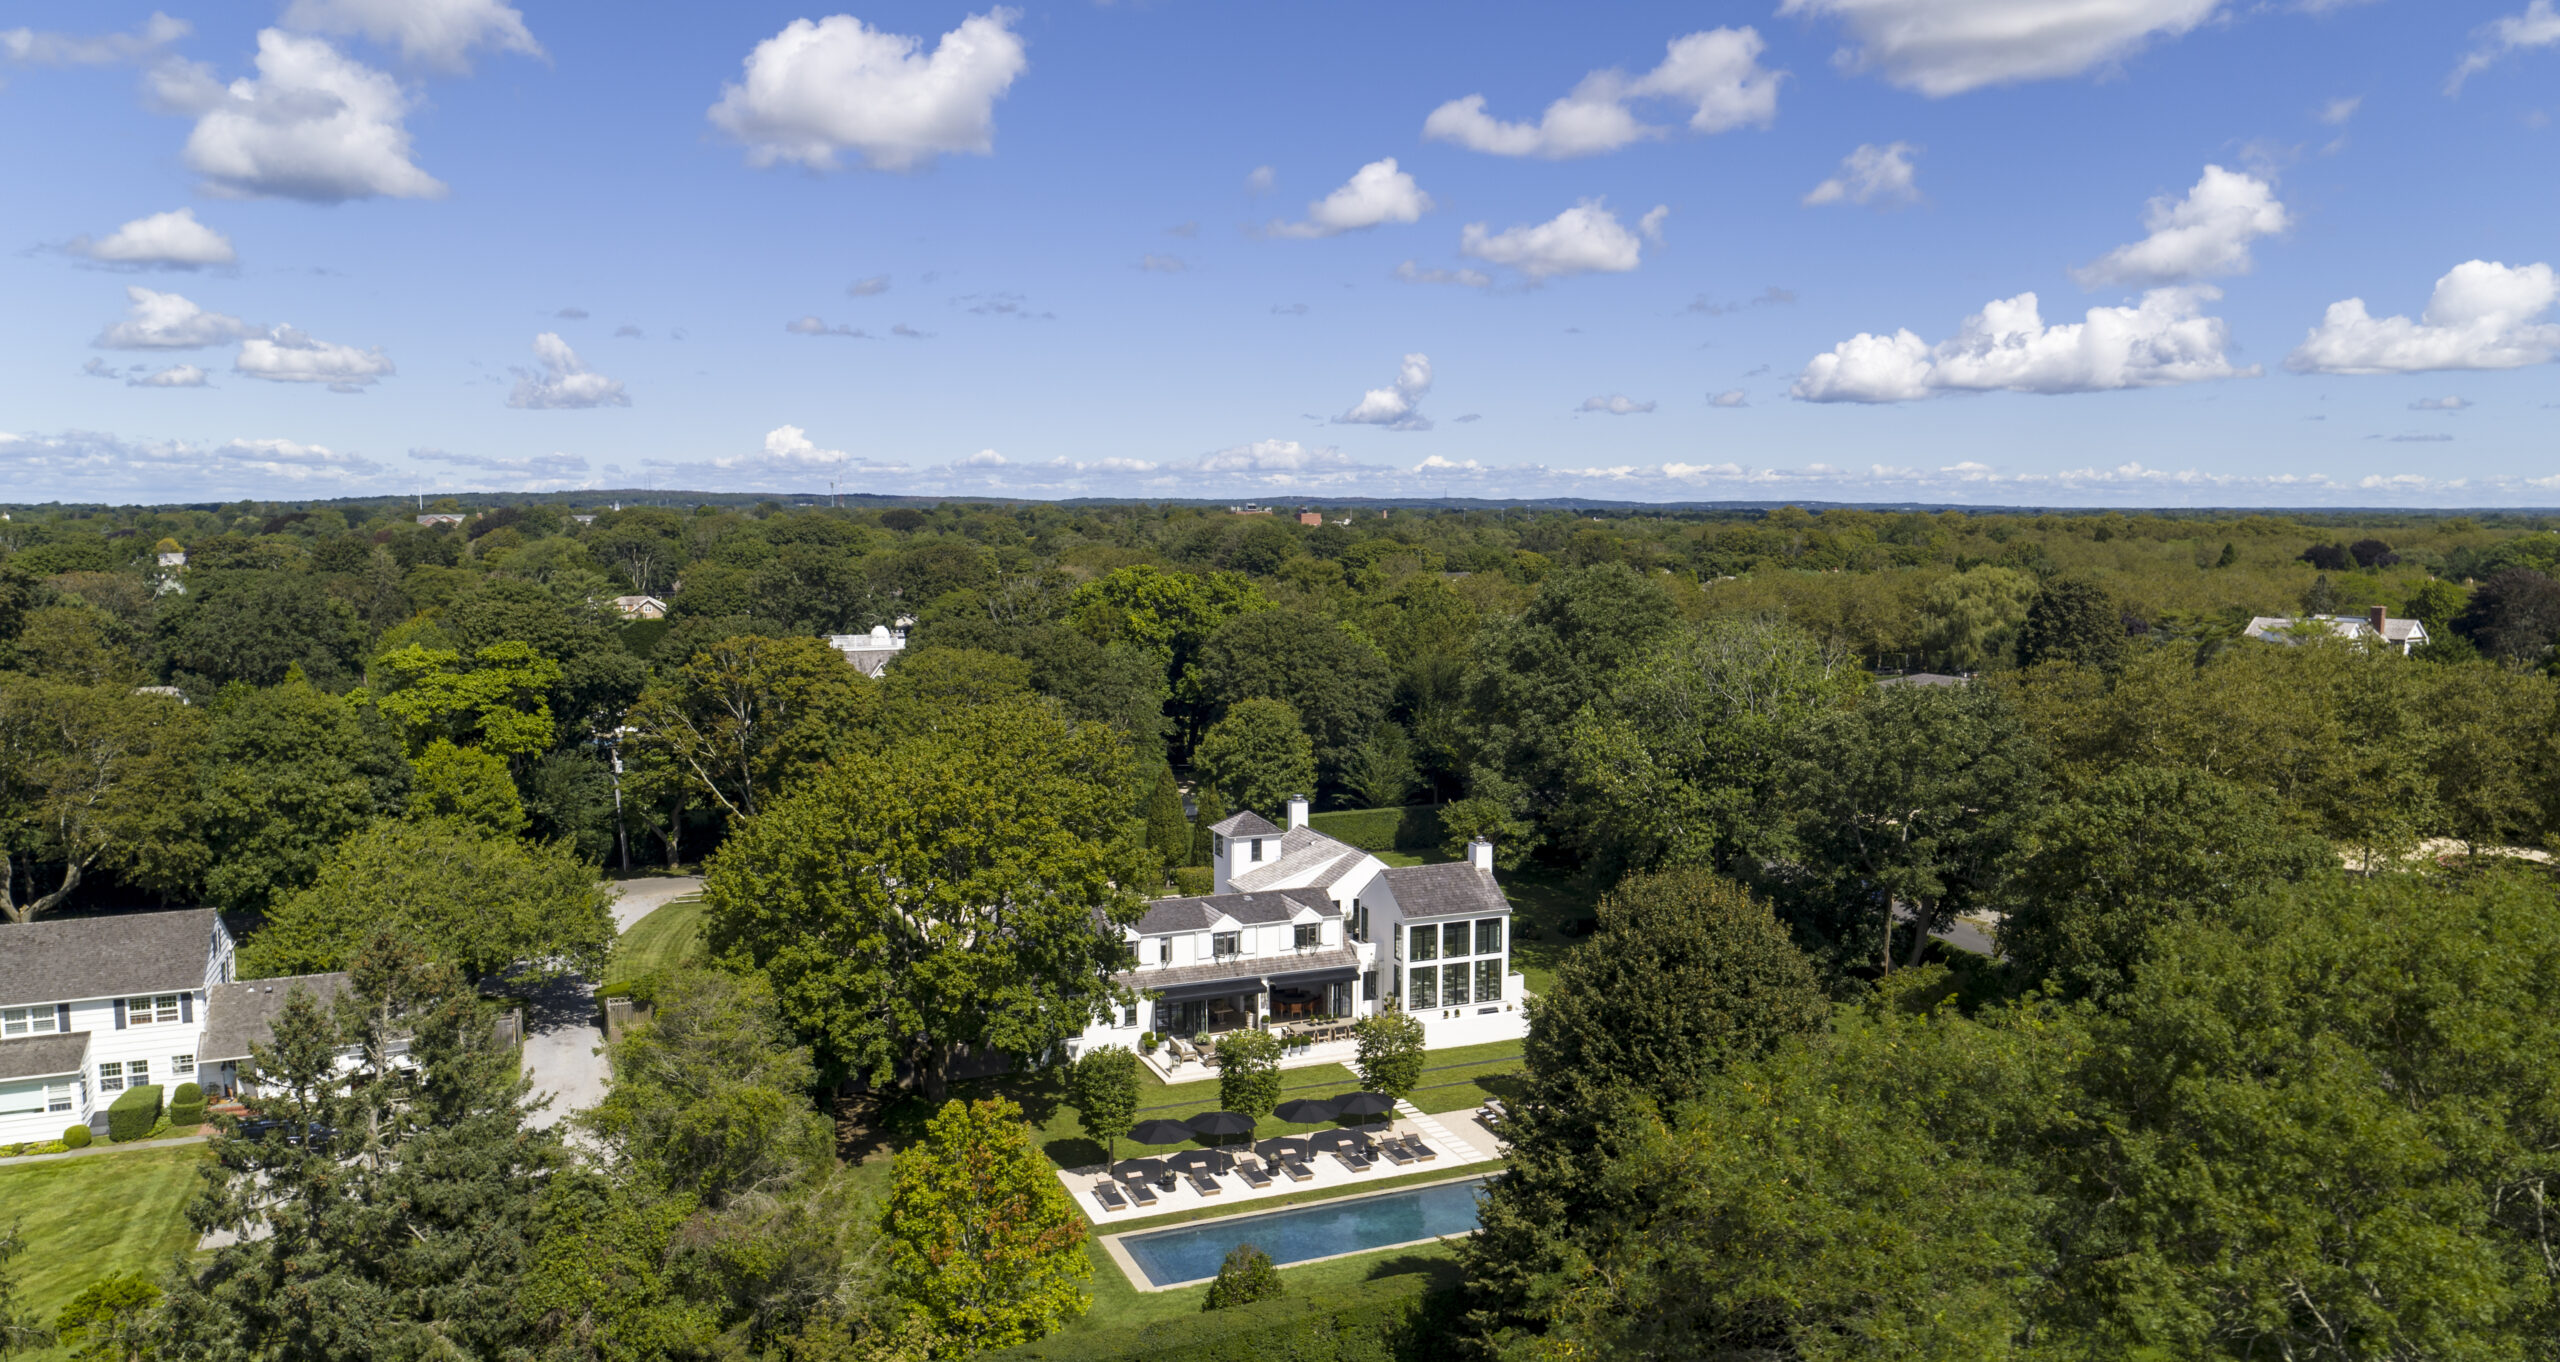 Sold in Southampton Village for $16.25 million,  146 Foster Crossing. COURTESY THE CORCORAN GROUP